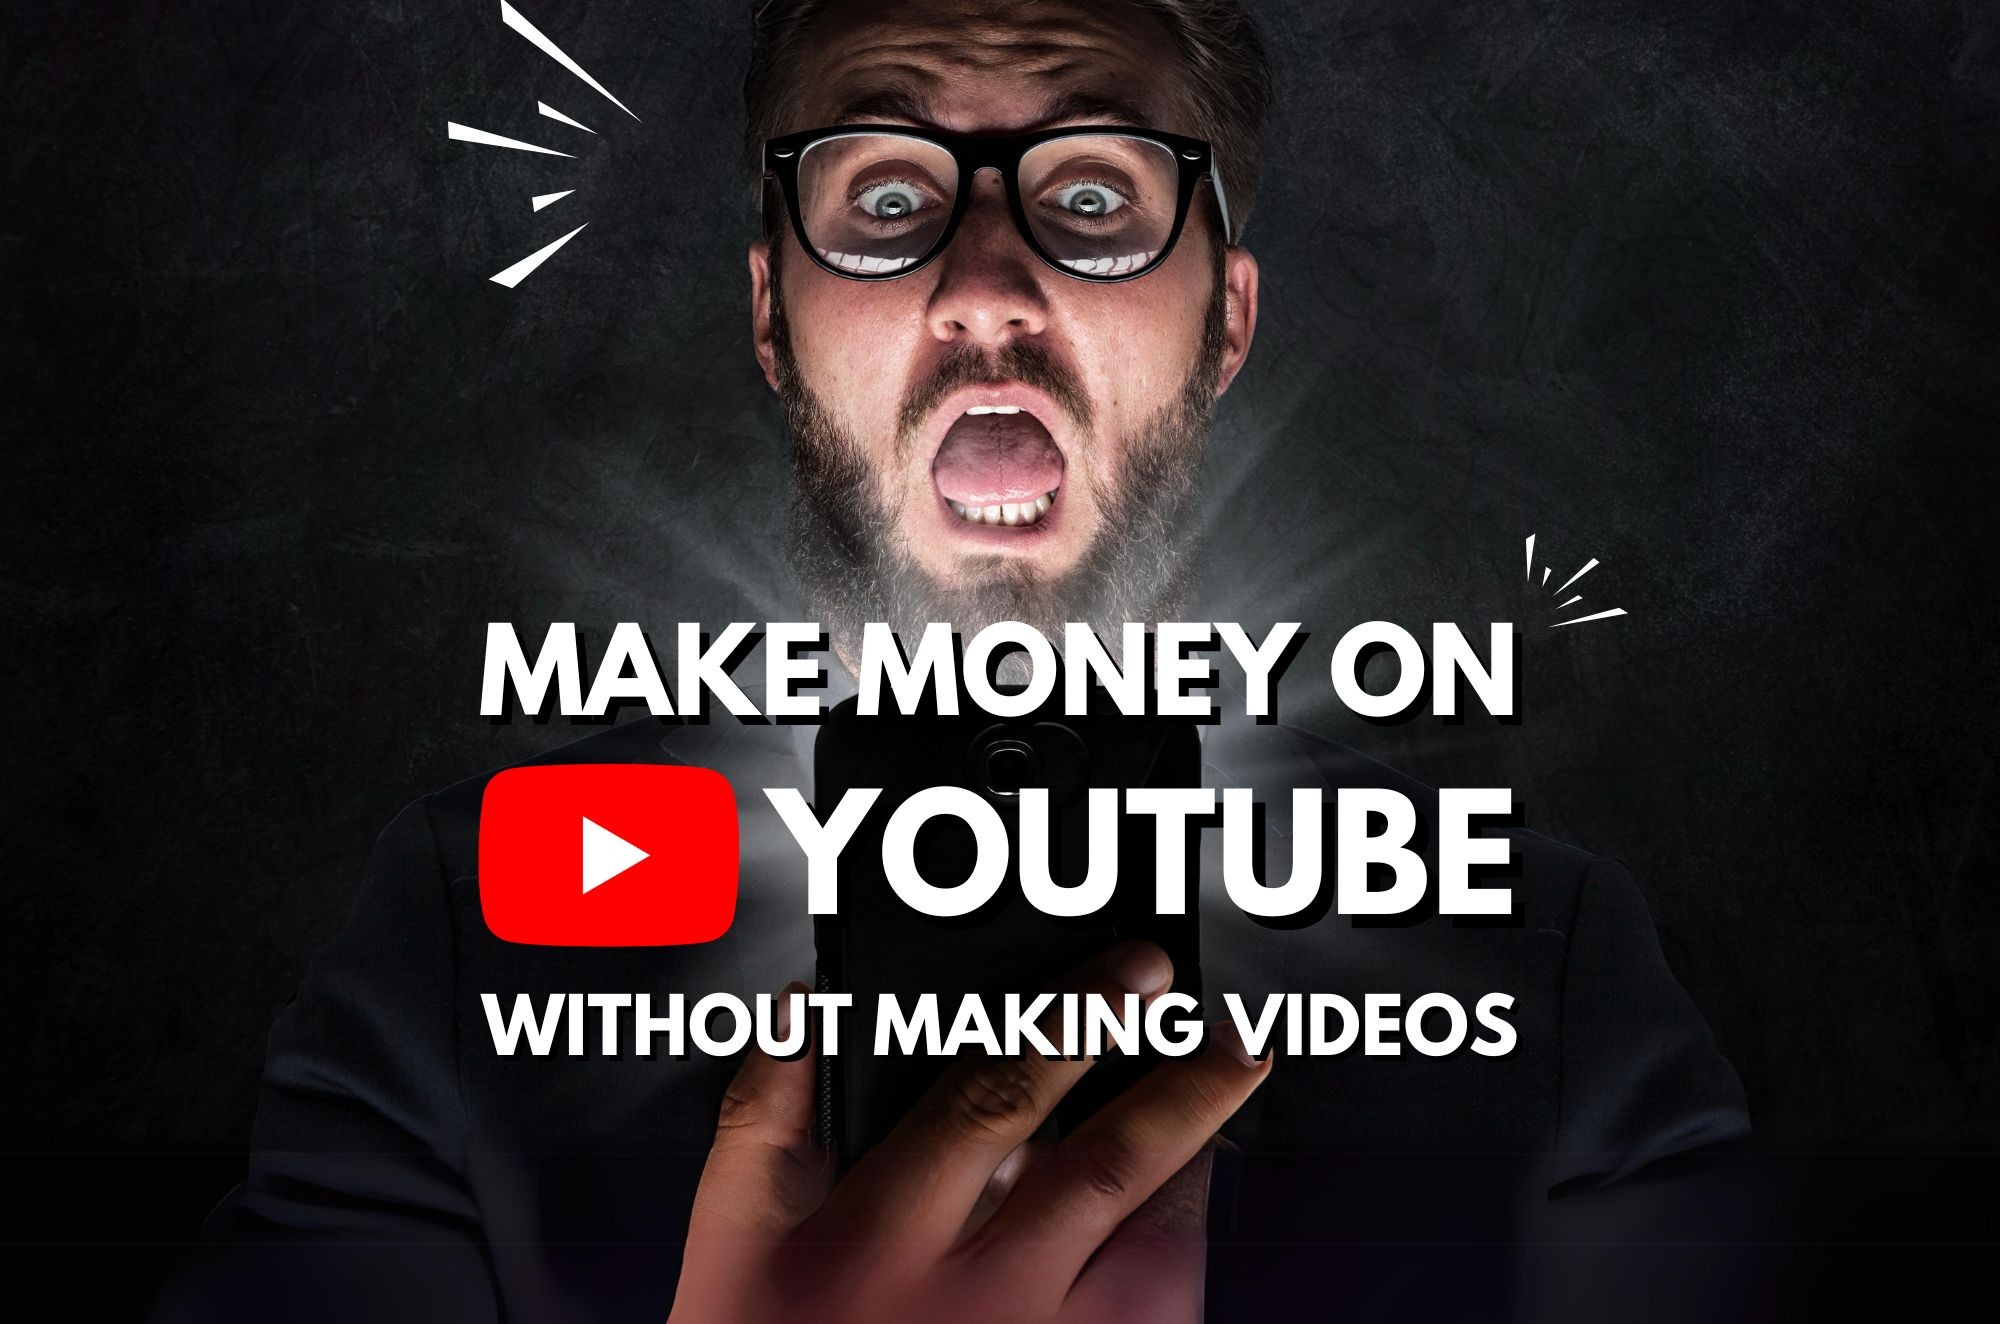 How to Make Money on YouTube without Making Videos?